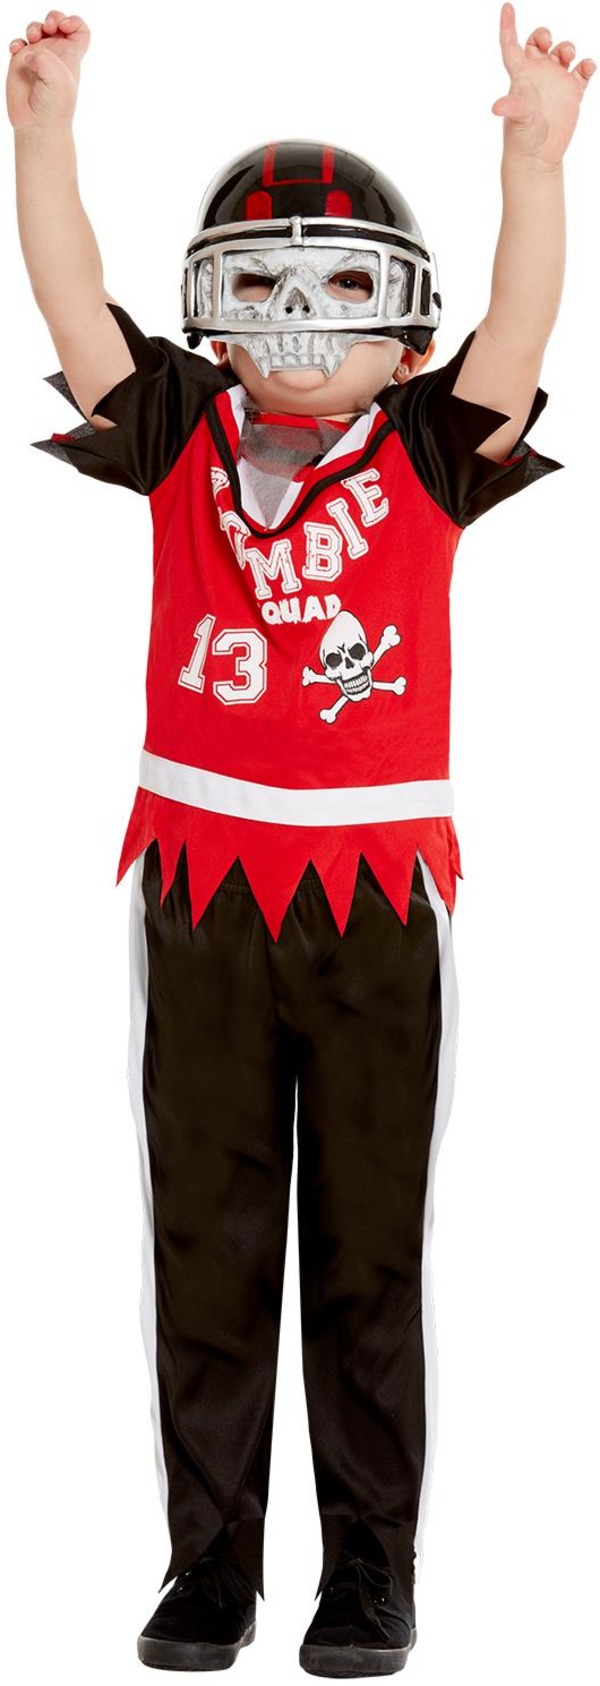 Zombie Football Player Costume - Fancy Dress Town, Superheroes ...